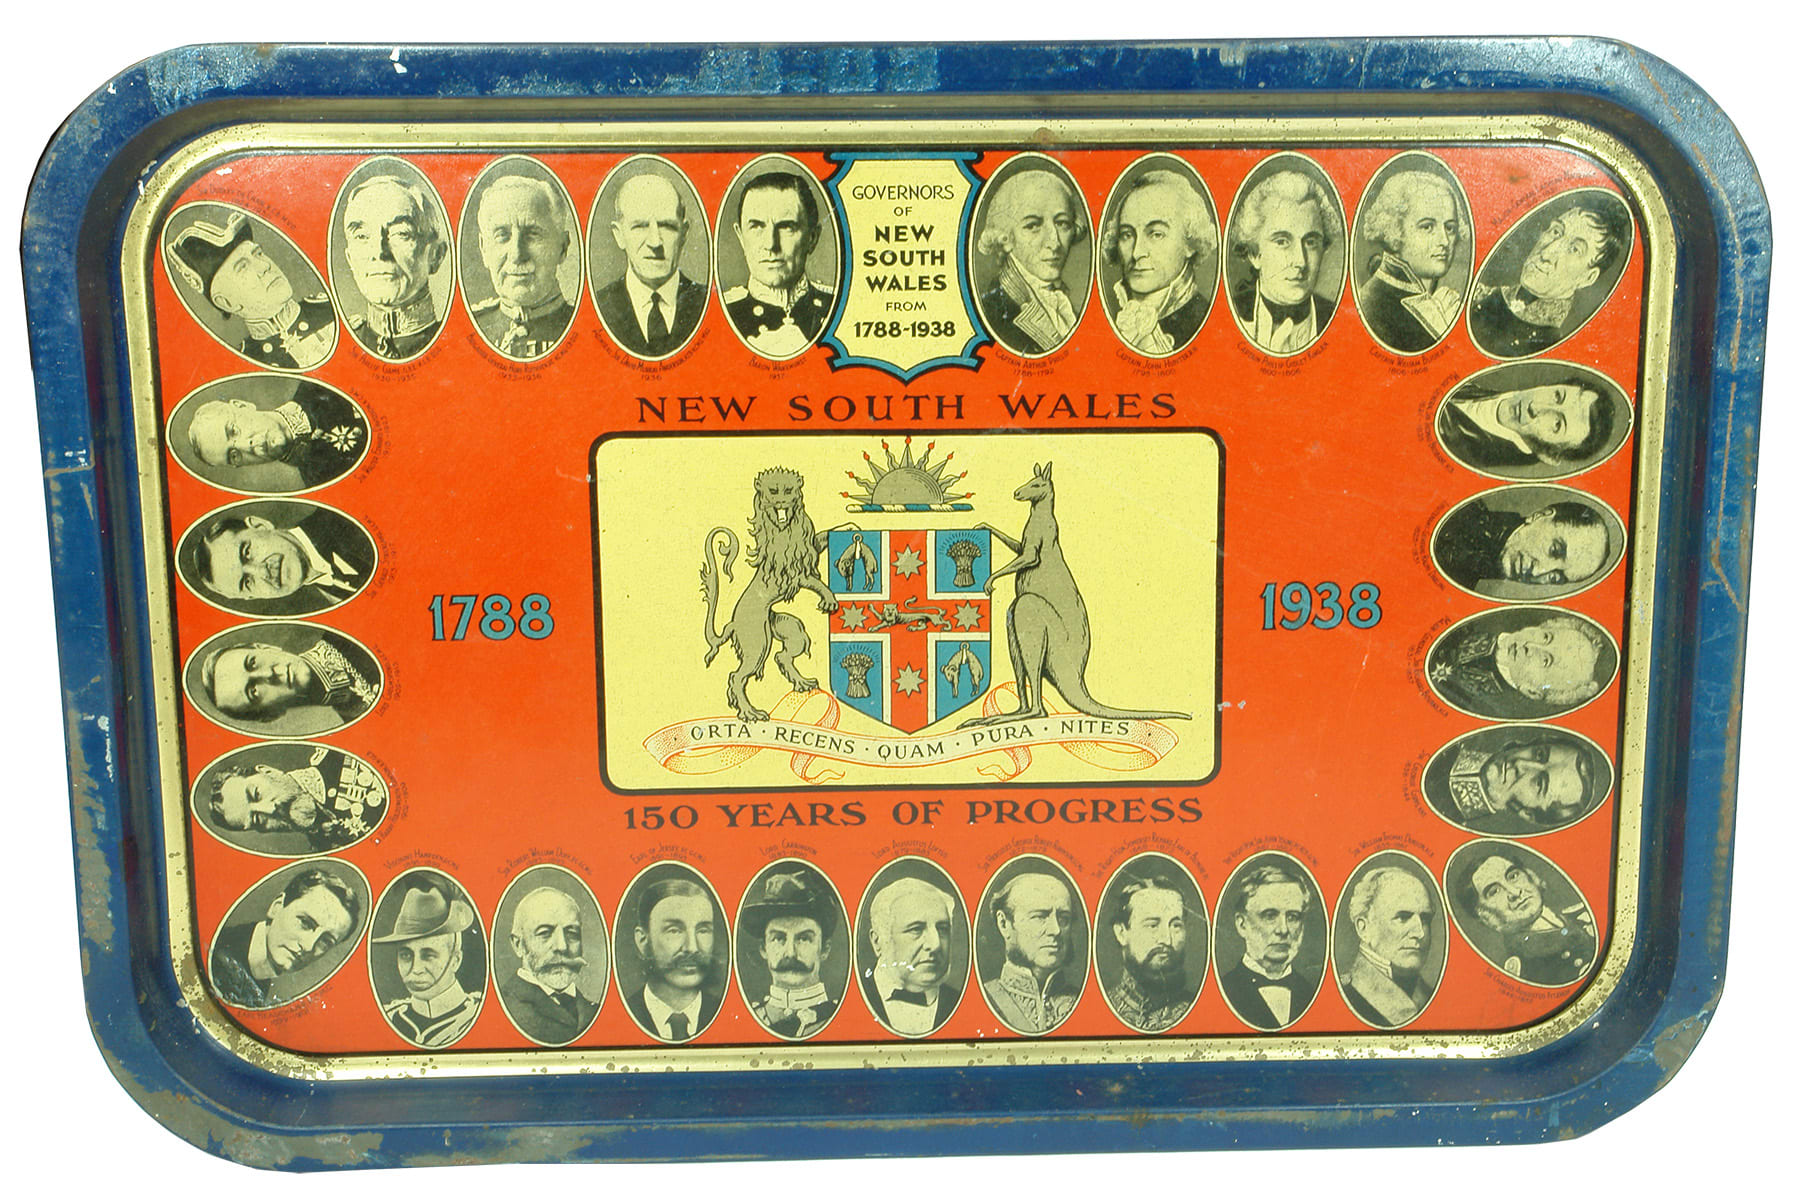 Governors New South Wales Sesquicentenary Commemorative Tray